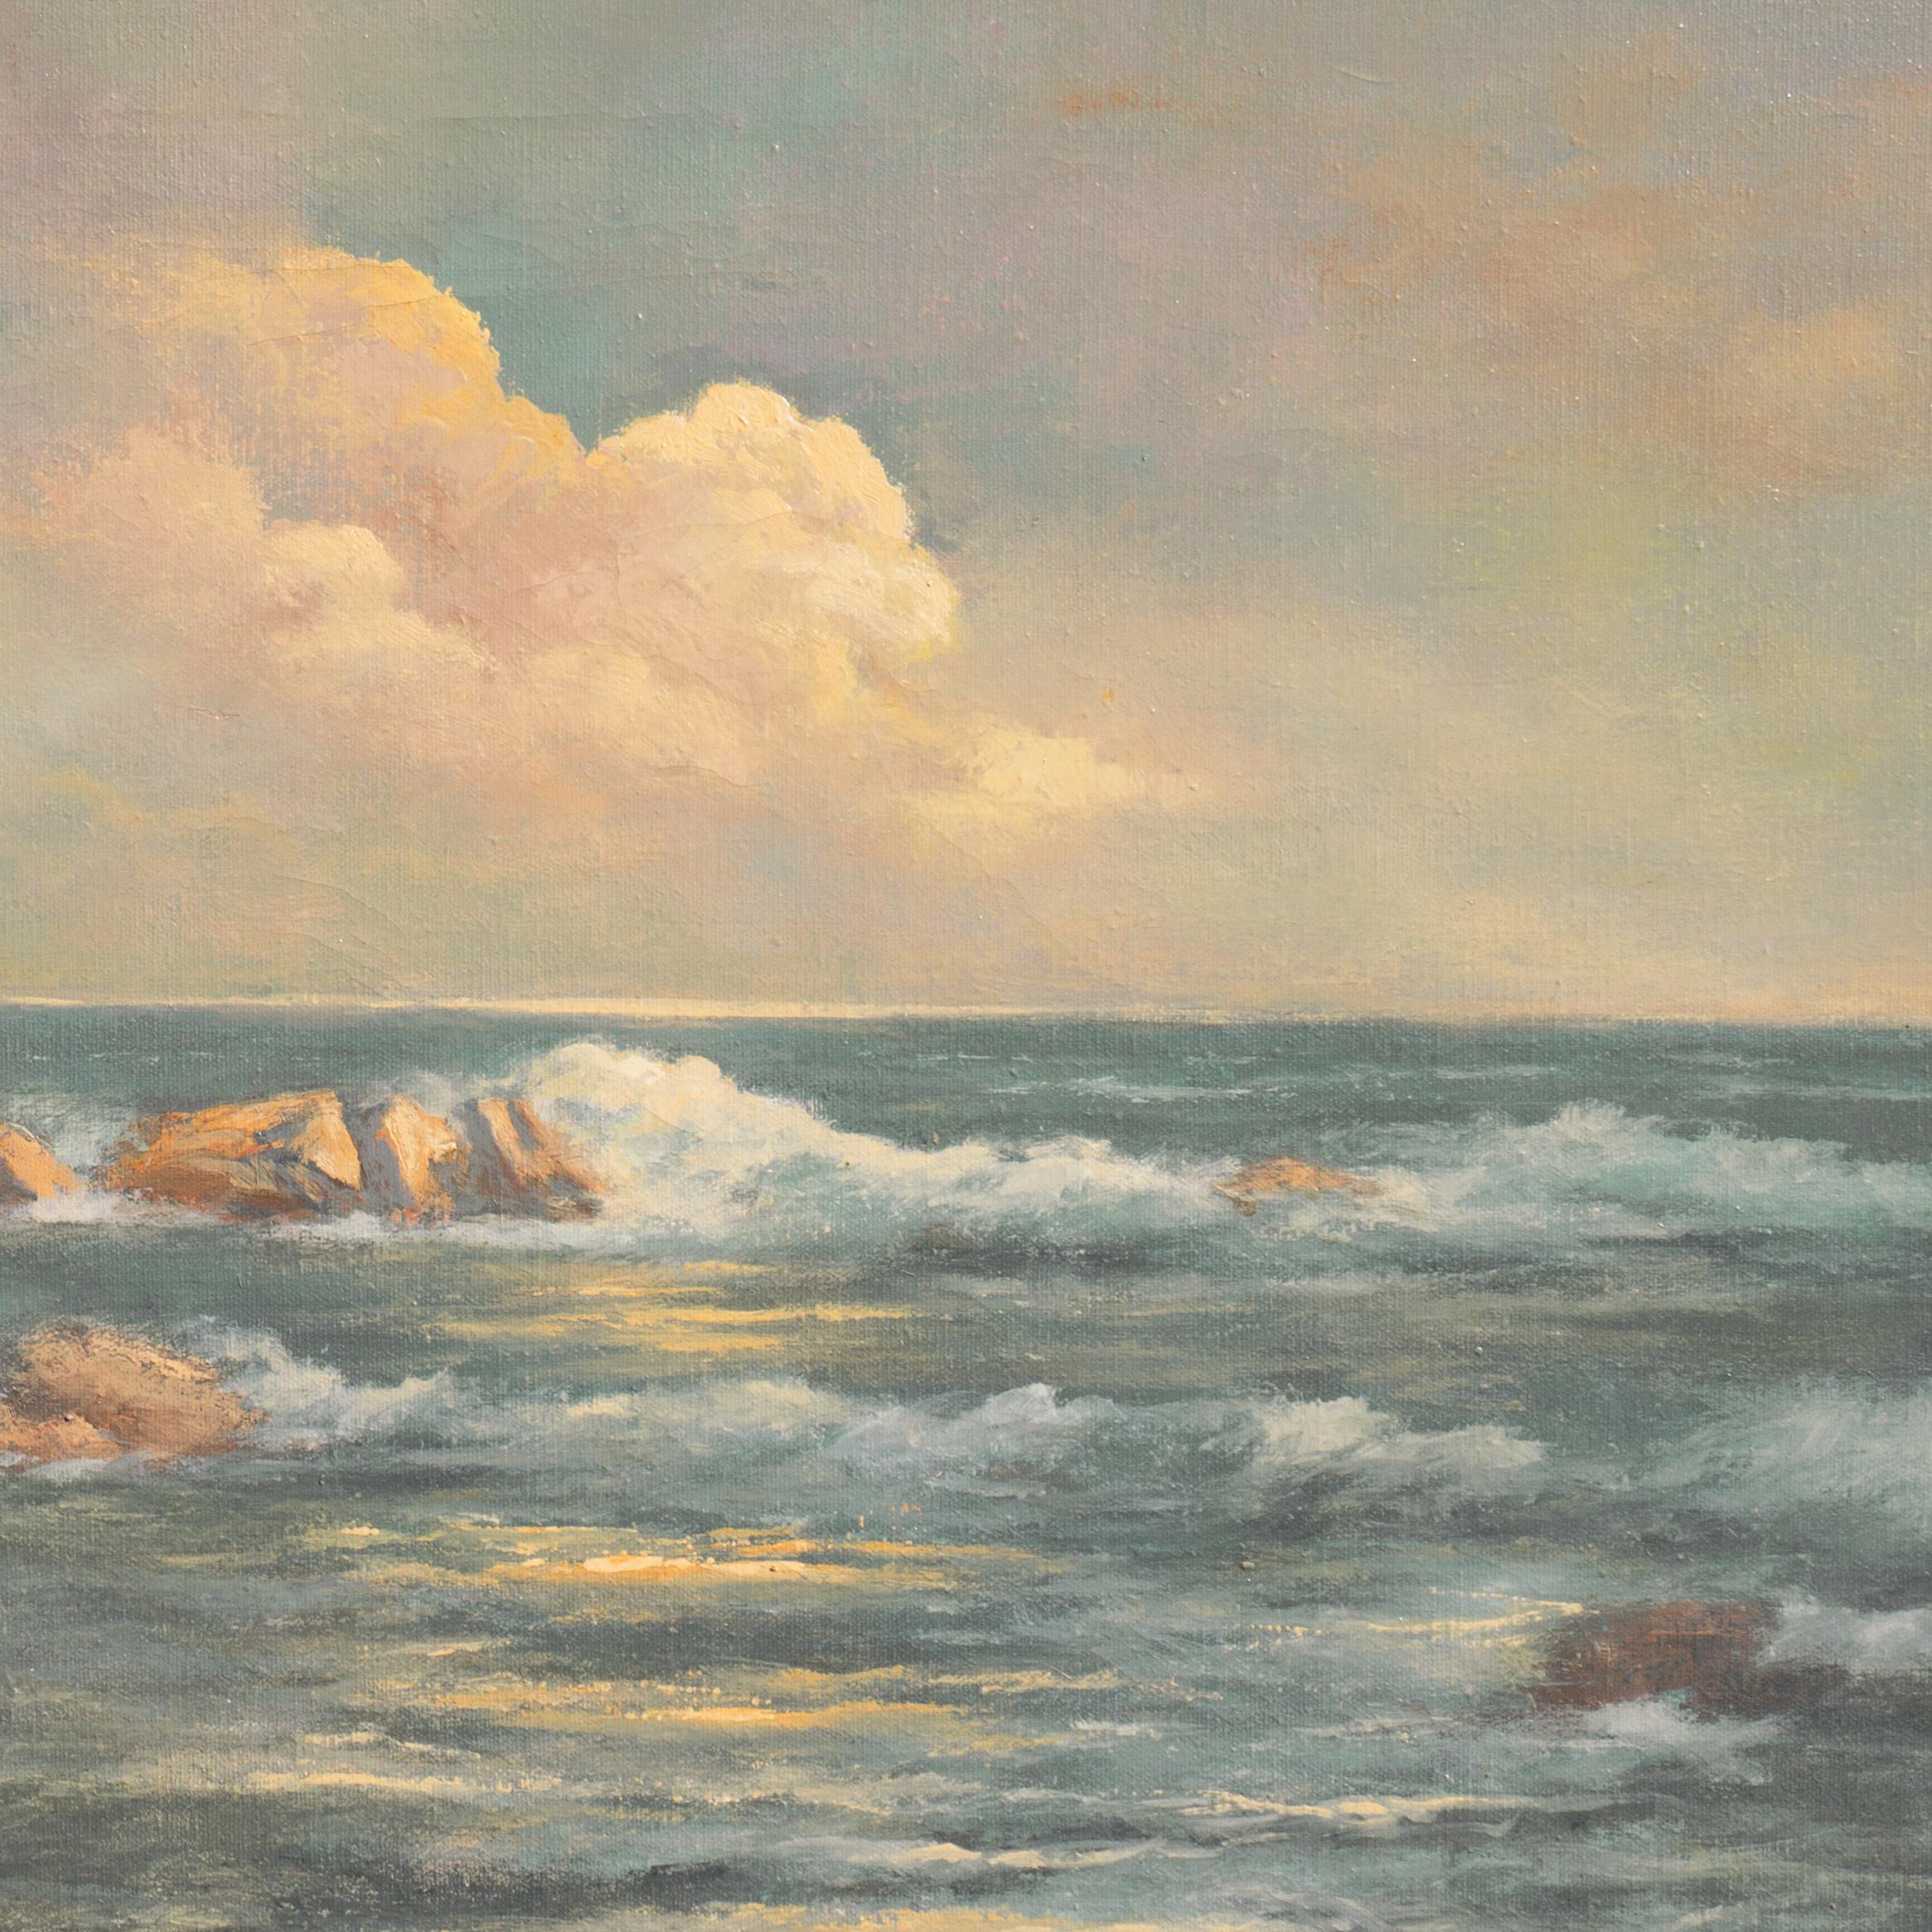 Signed lower left, 'P.H. Schmidt' for Peter Hermann Schmidt (German-American, 1886-1974) and painted circa 1965. 

A delicately painted study of light and water showing pacific breakers rolling in towards the rocky California coastline beneath